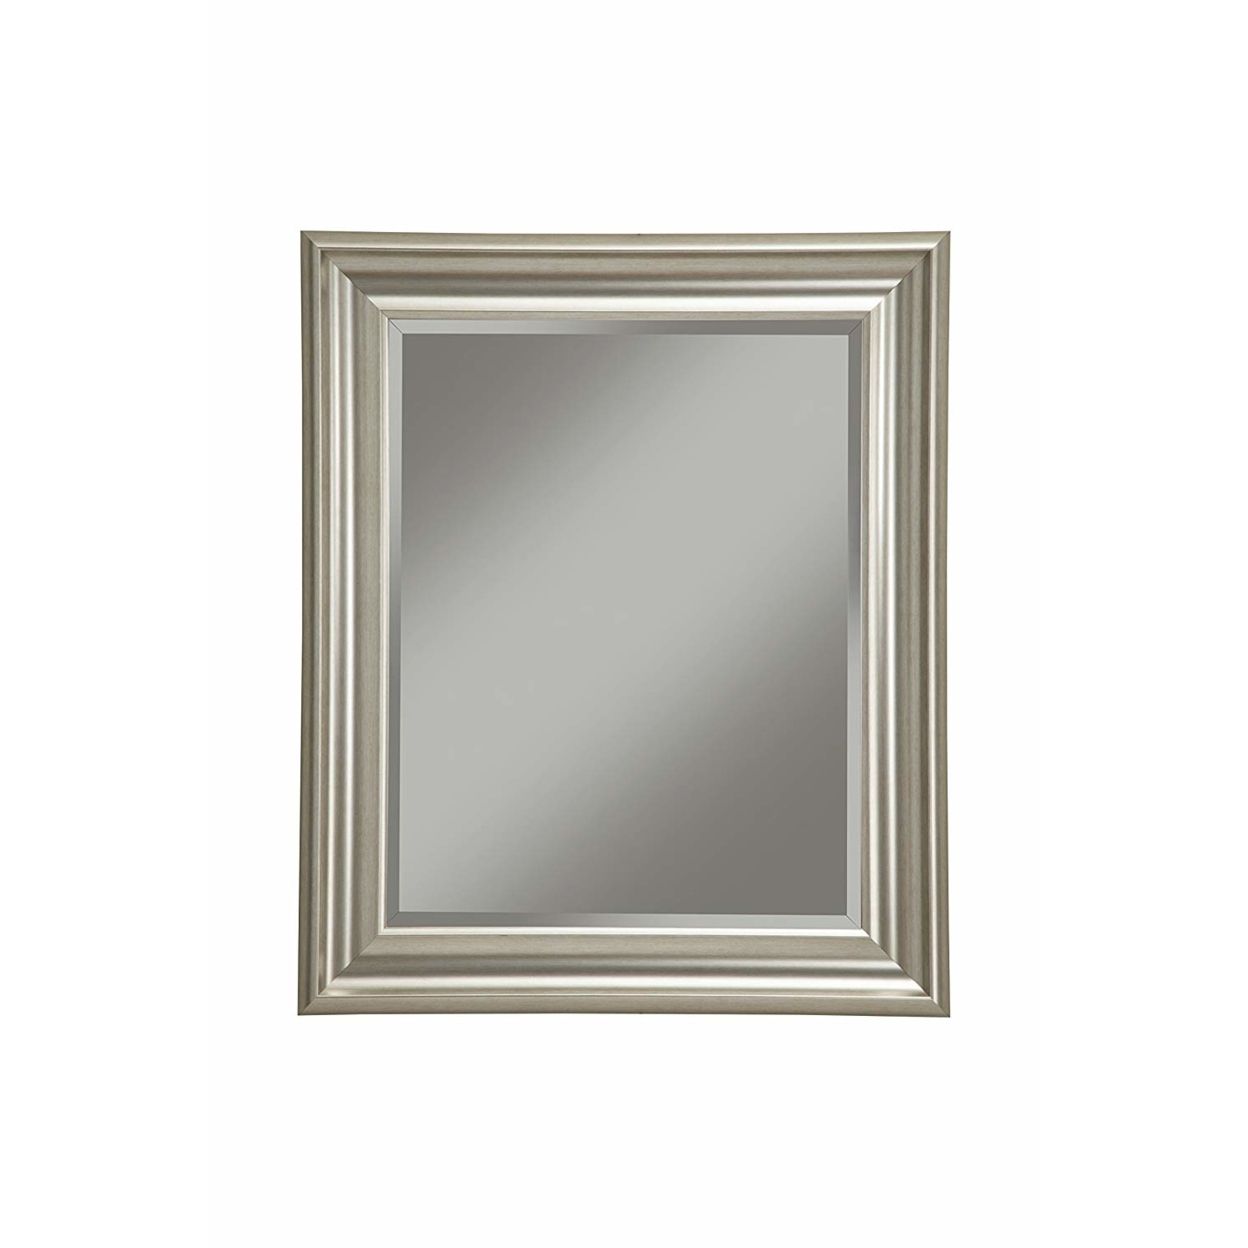 Polystyrene Framed Wall Mirror With Beveled Glass, Champagne Silver In Intended For Silver Beveled Wall Mirrors (View 12 of 15)